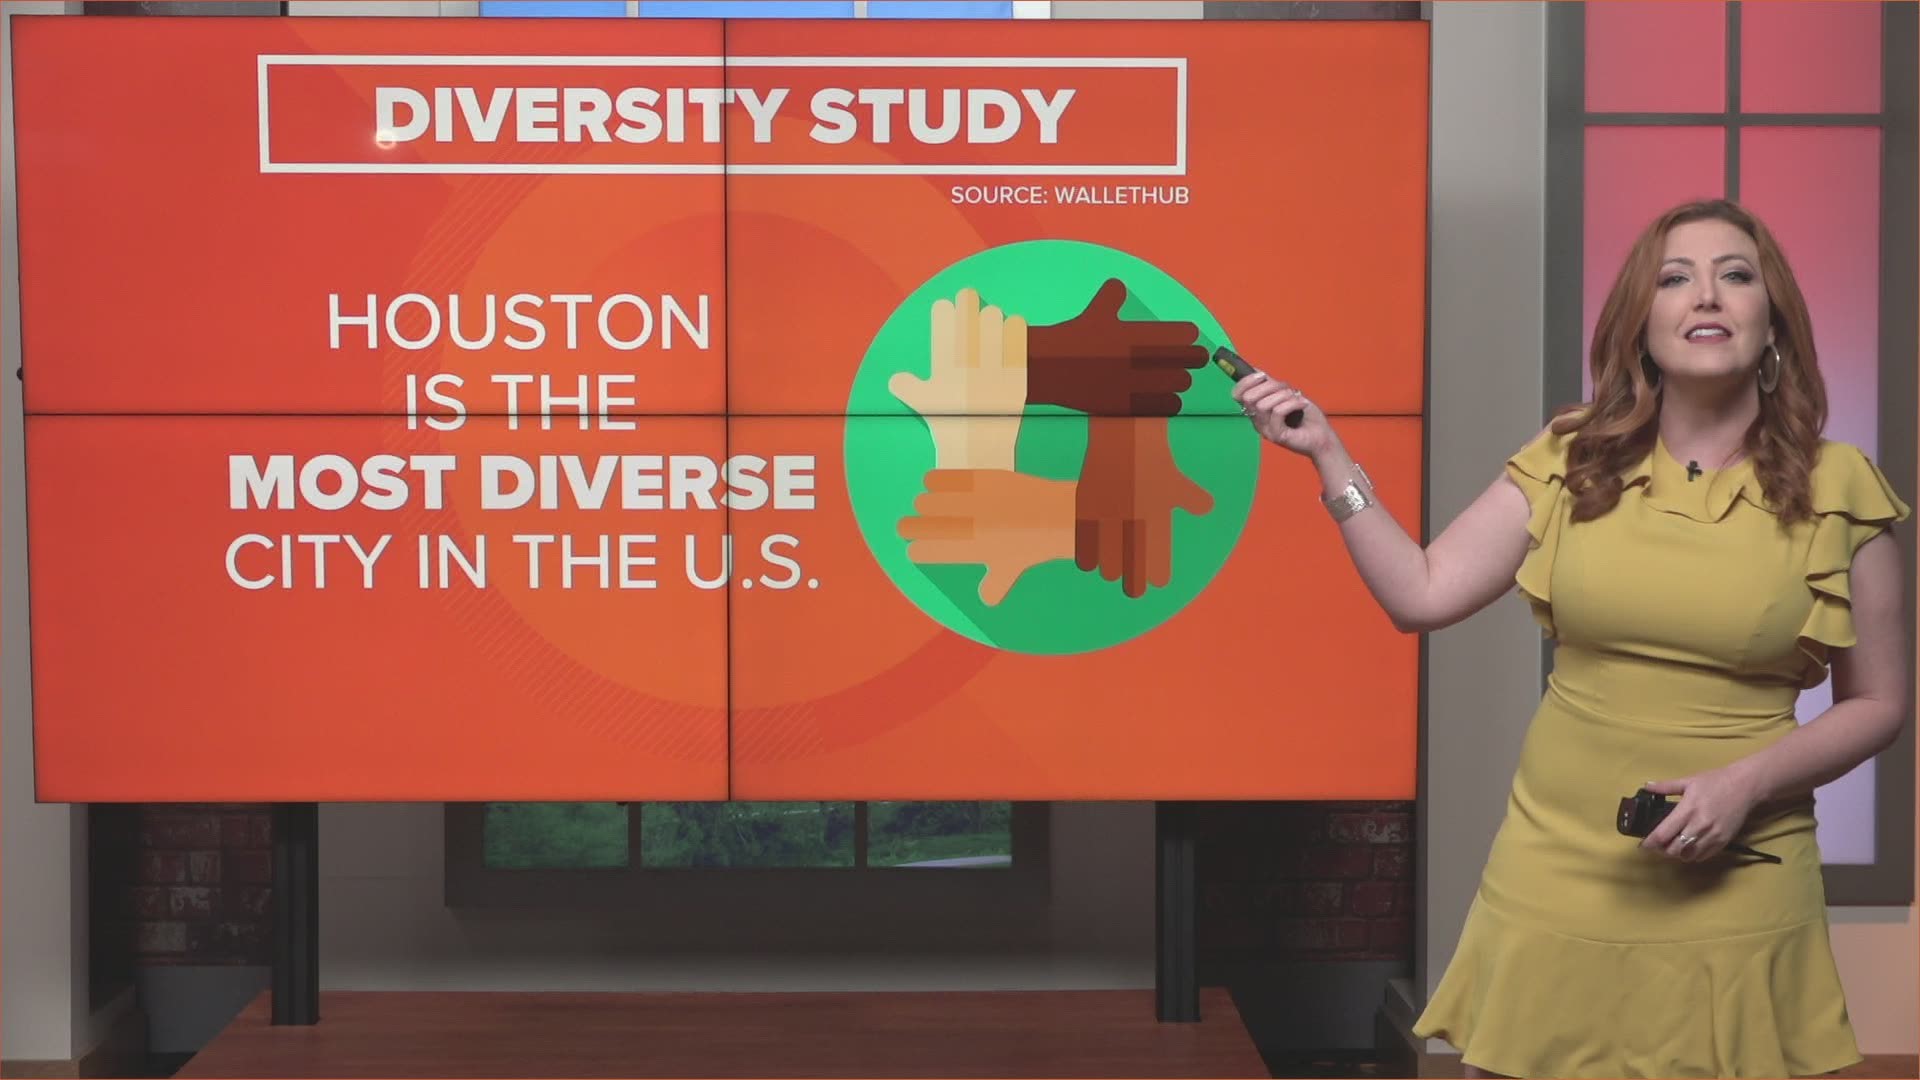 WalletHub says it evaluated diversity across 501 of the largest cities in America and Houston landed in the top spot.